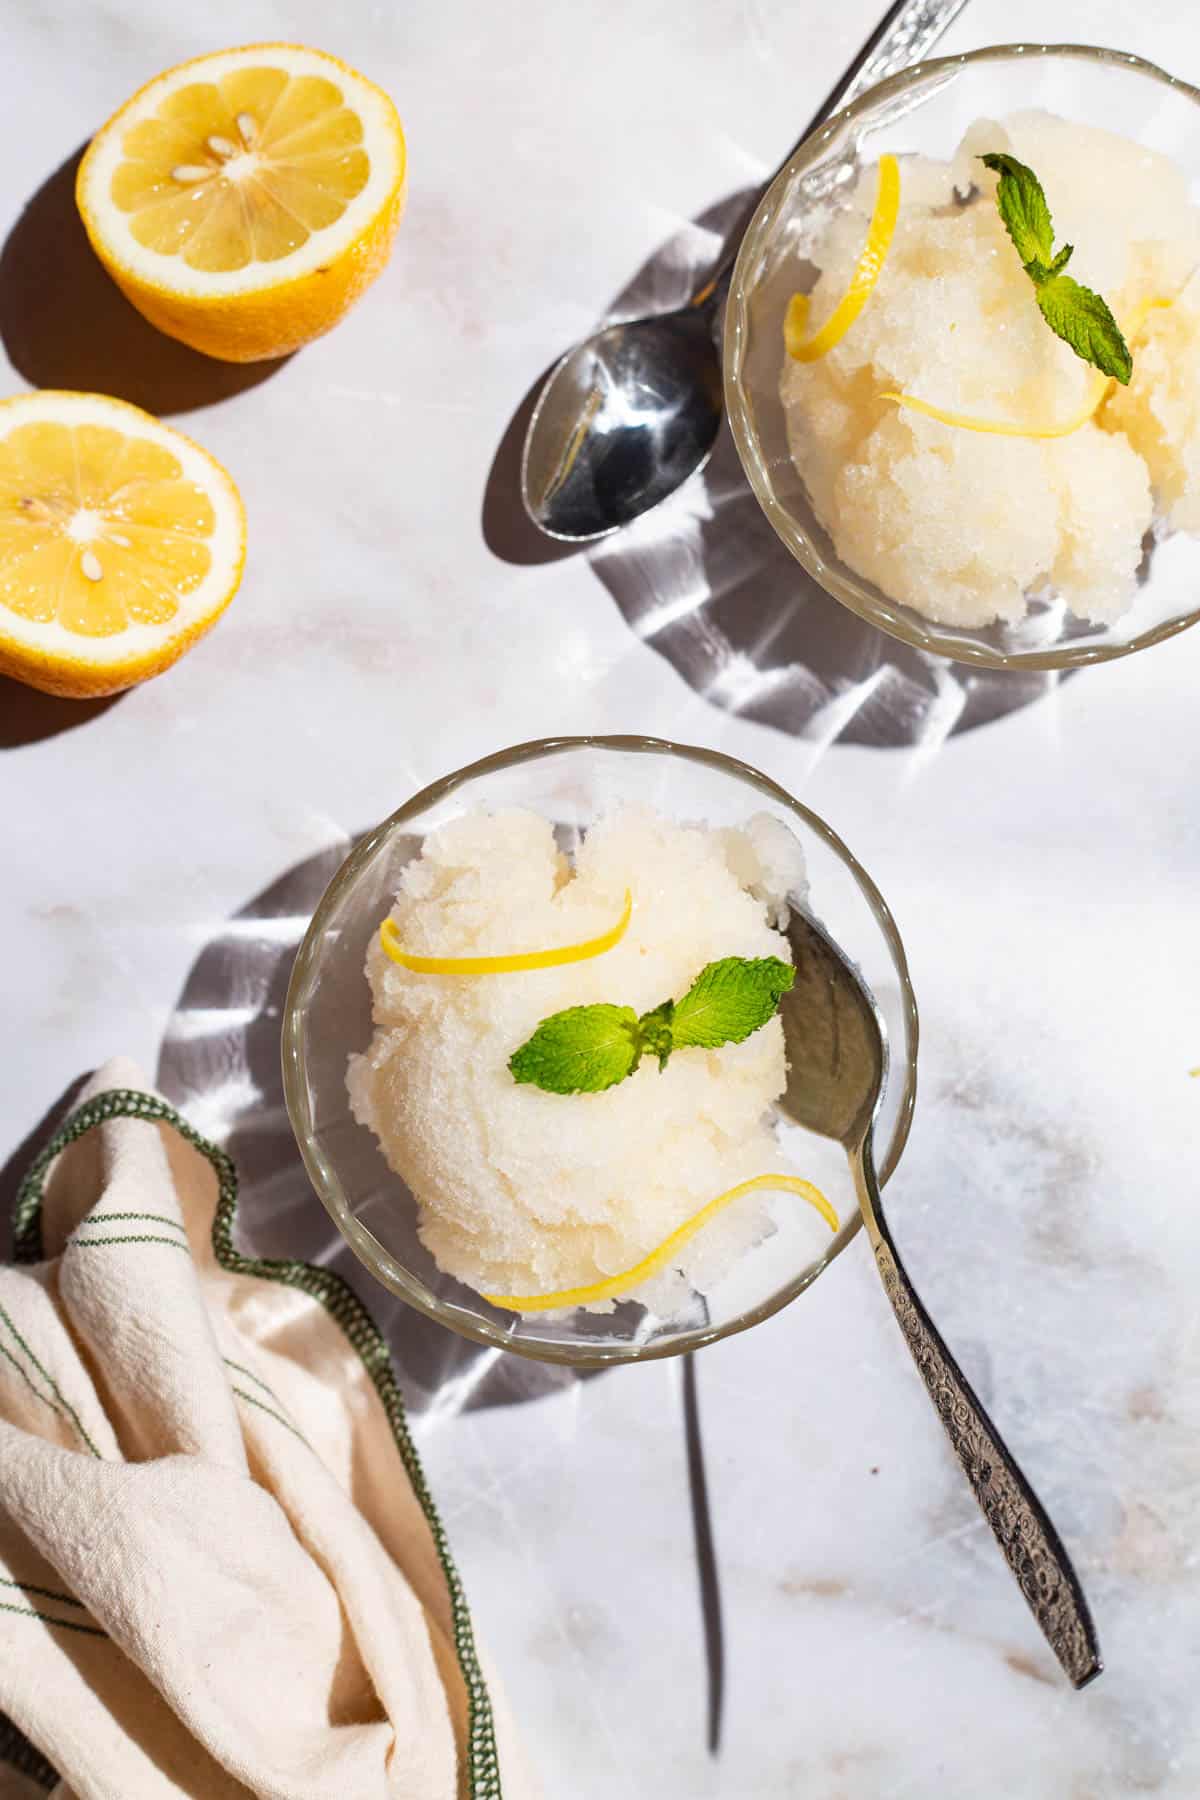 An overhead photo of 2 bowls of lemon sorbet, one with a spoon, and one next to a spoon. Next to these are 2 lemon wheels and a kitchen towel.